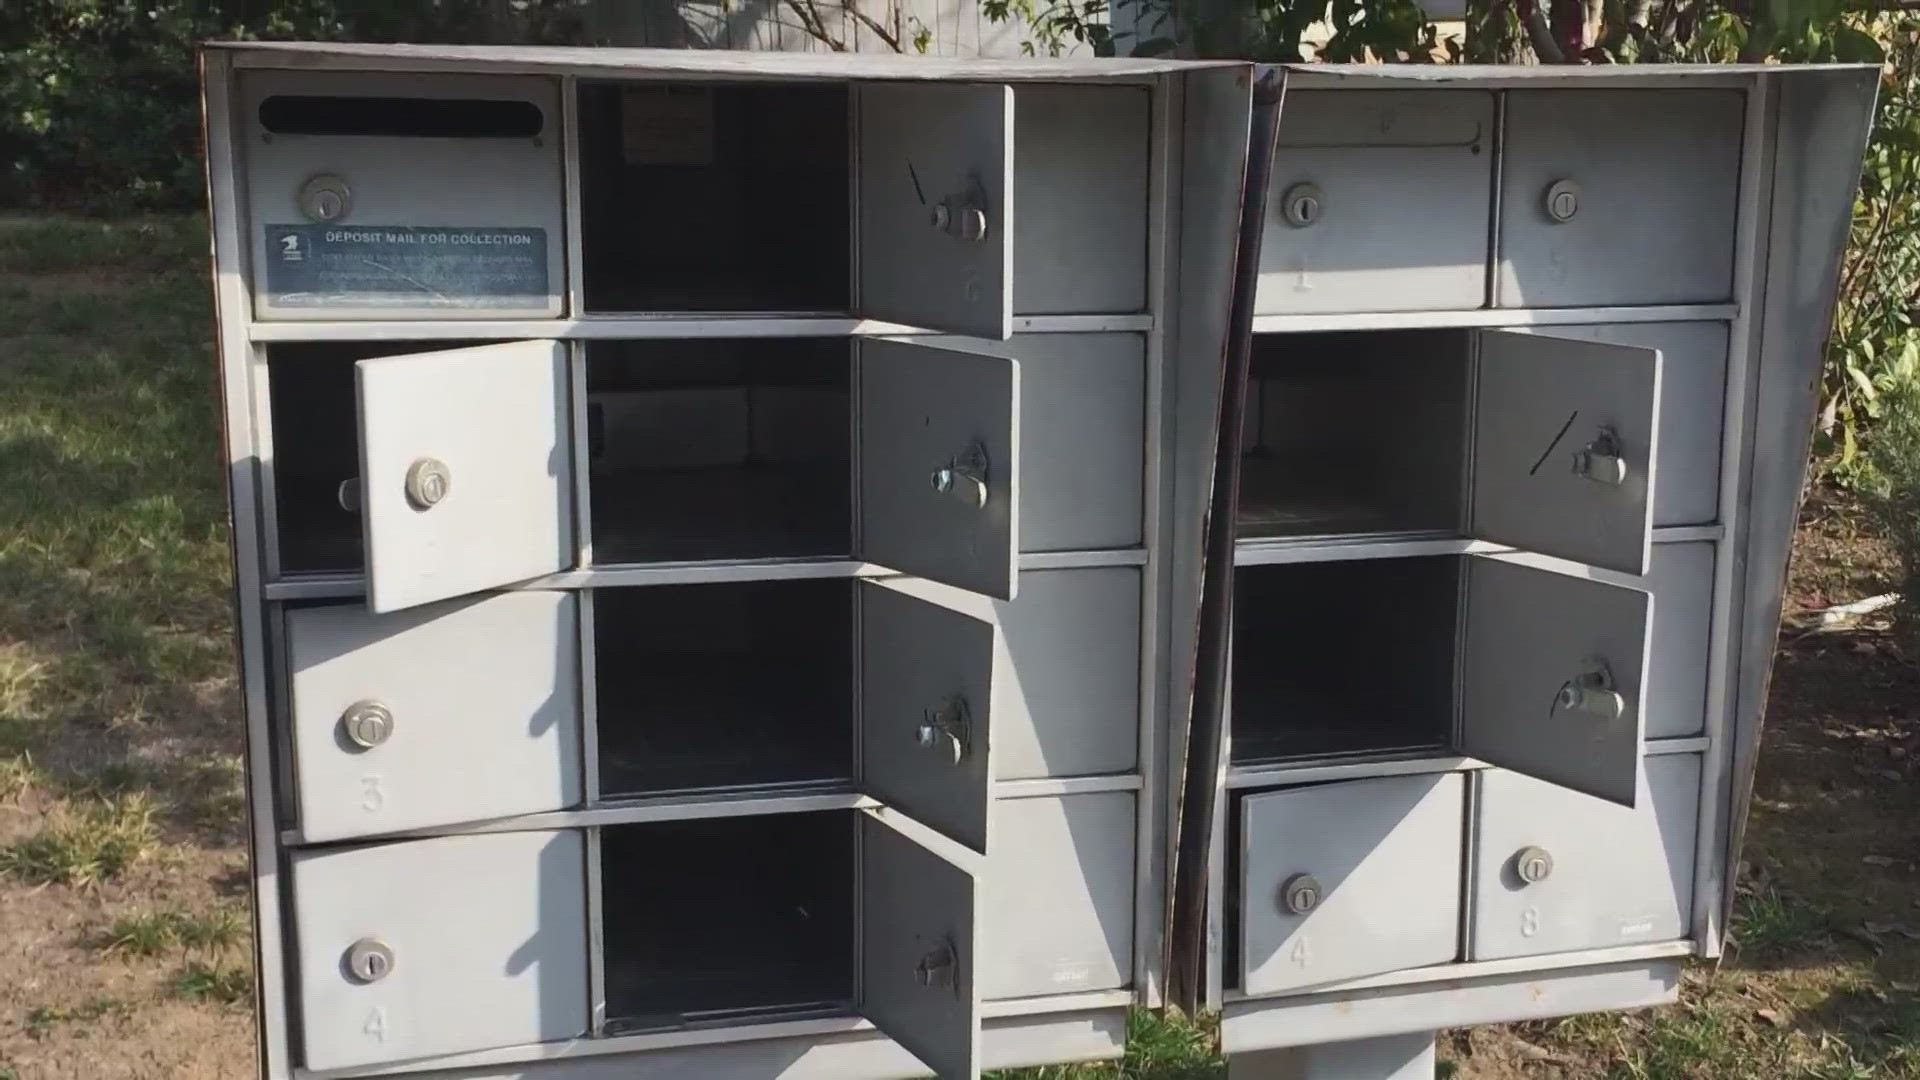 A Sacramento man is calling for action after he said his cluster mailbox has been hit multiple times in his neighborhood.